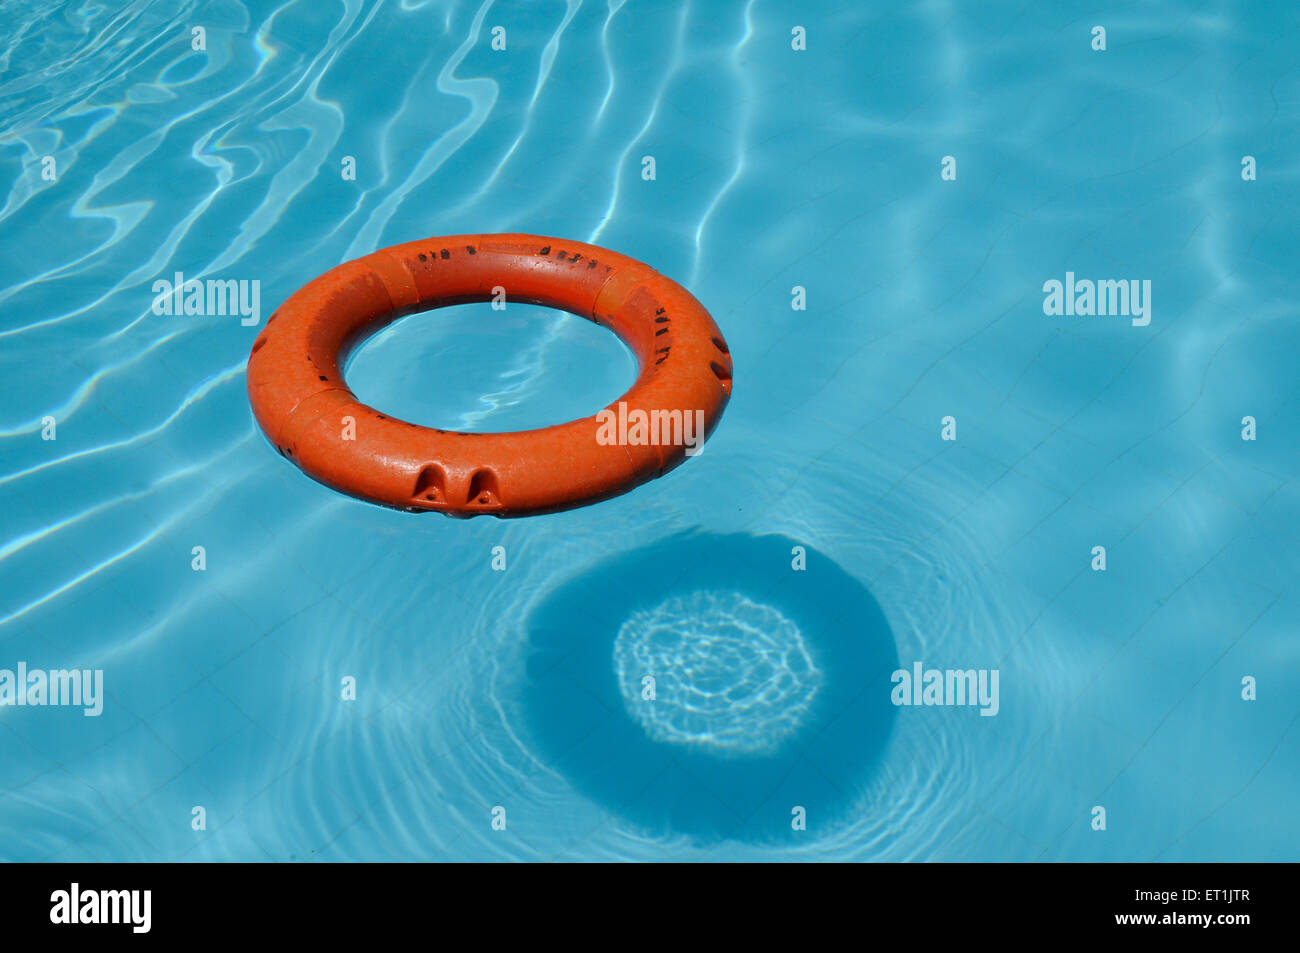 Lifeguard ring floating on blue water in swimming pool Stock Photo